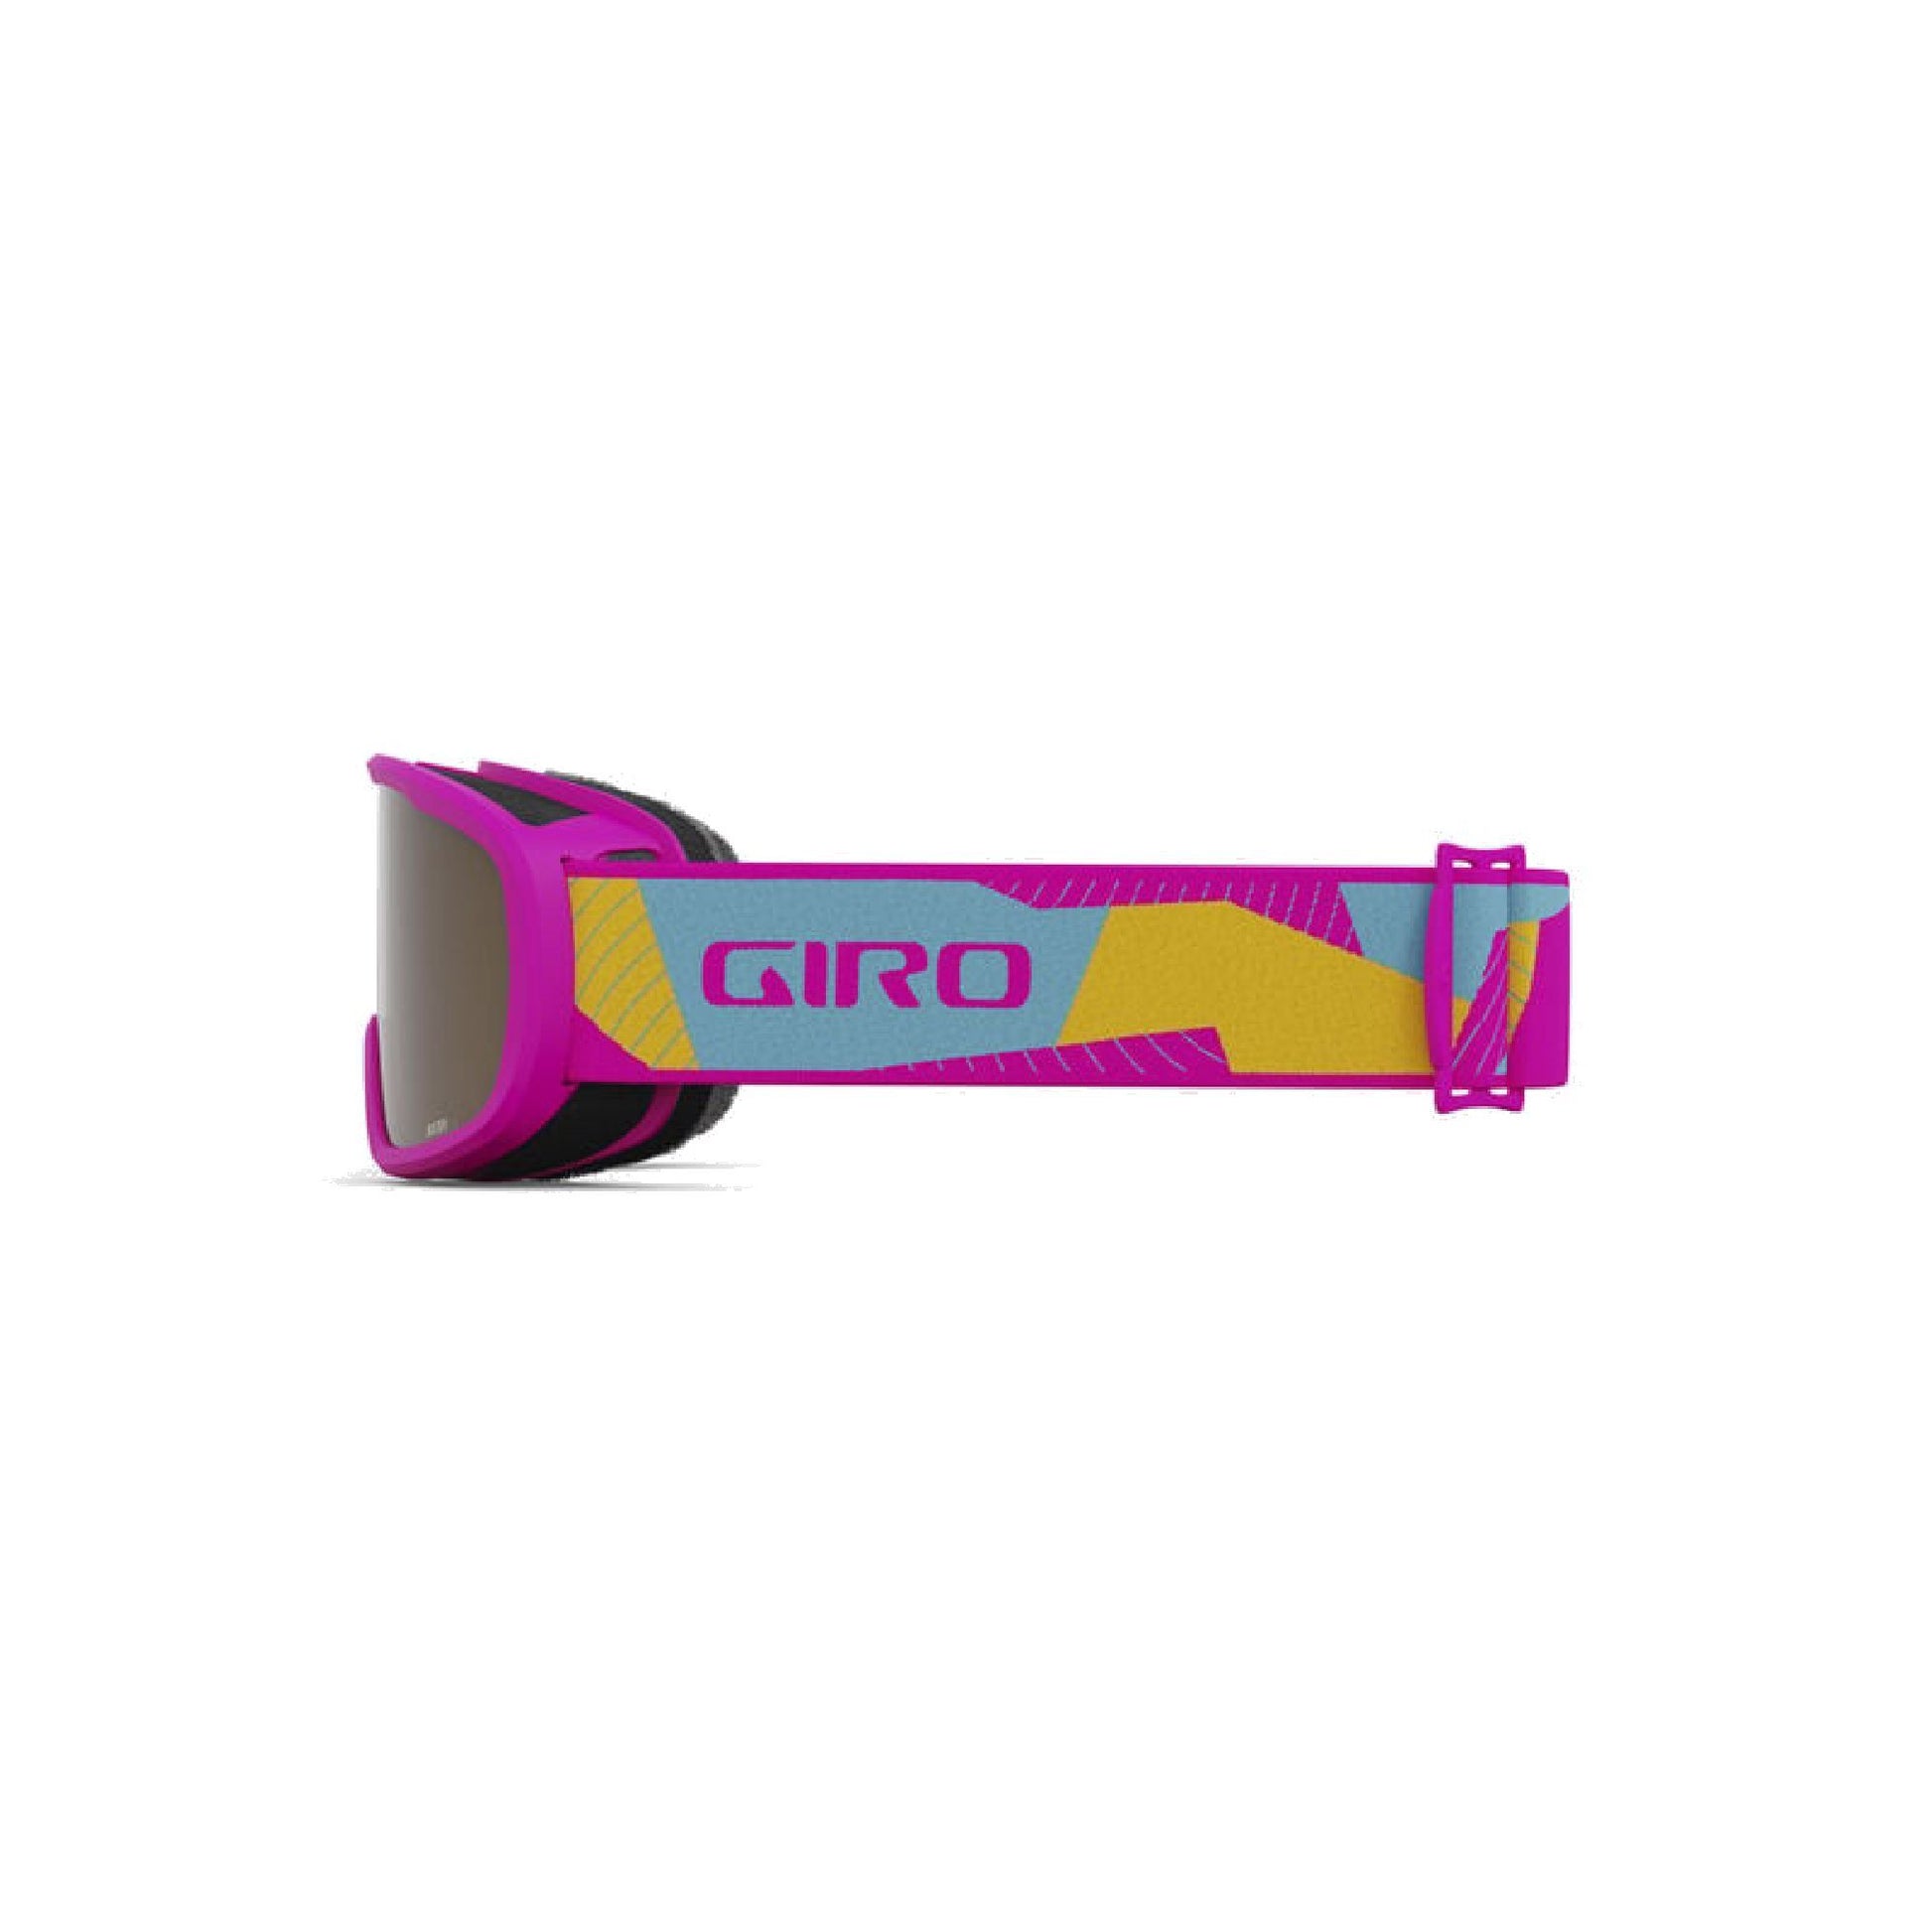 Giro Youth Buster Snow Goggles Pink Geo Camo / Amber Rose Snow Goggles